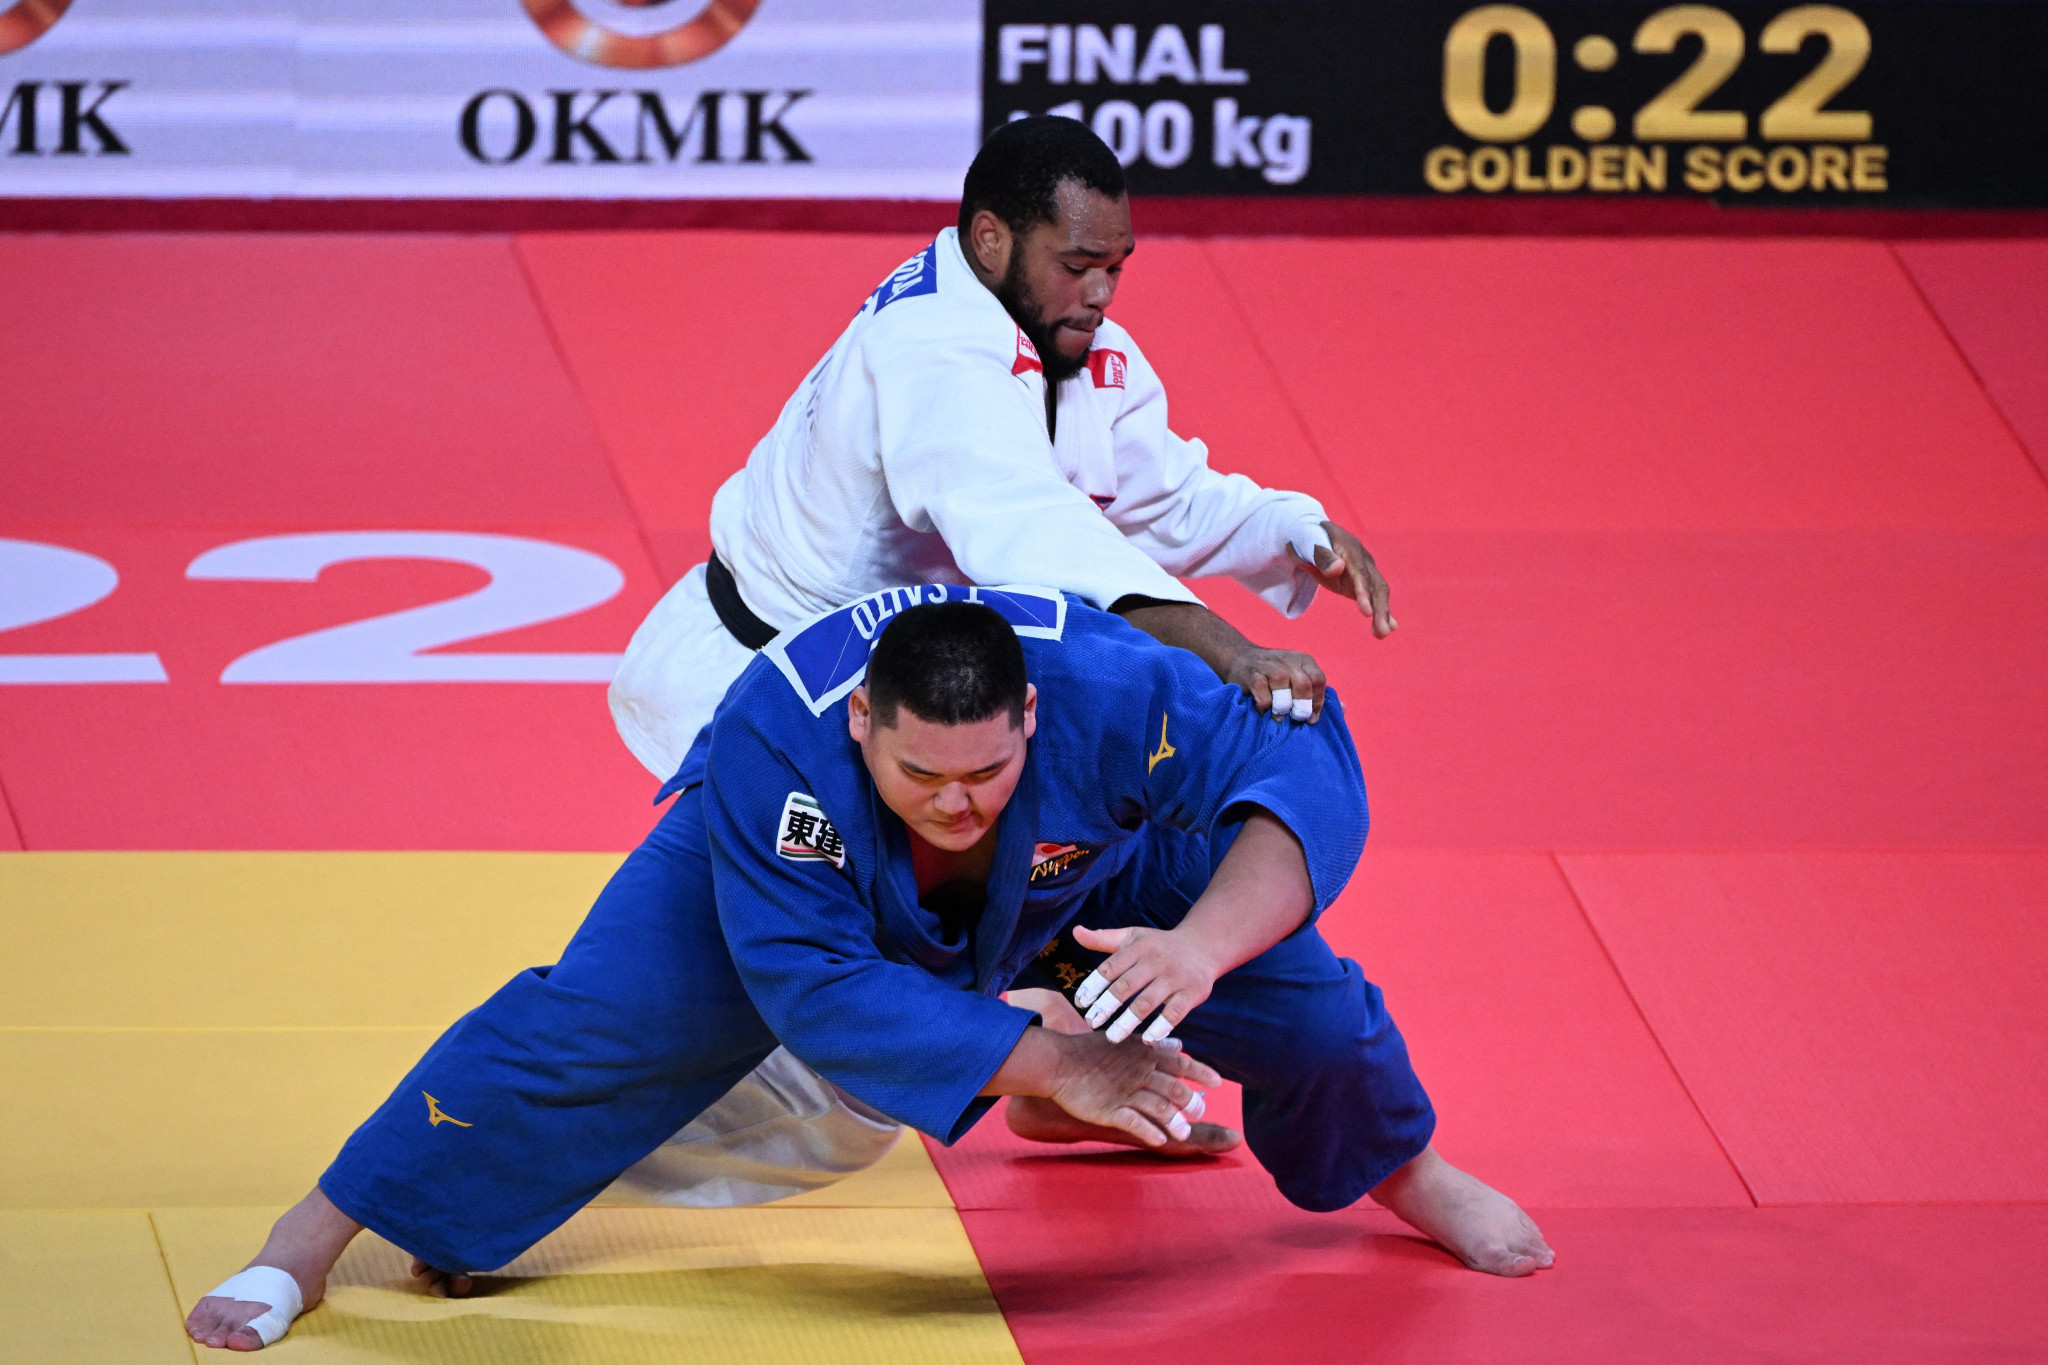 Andy Granda, in white, defeated Japan's Tatsuru Saito in the men's over-100kg final after the 20-year-old was given a hansoku-make ©Getty Images